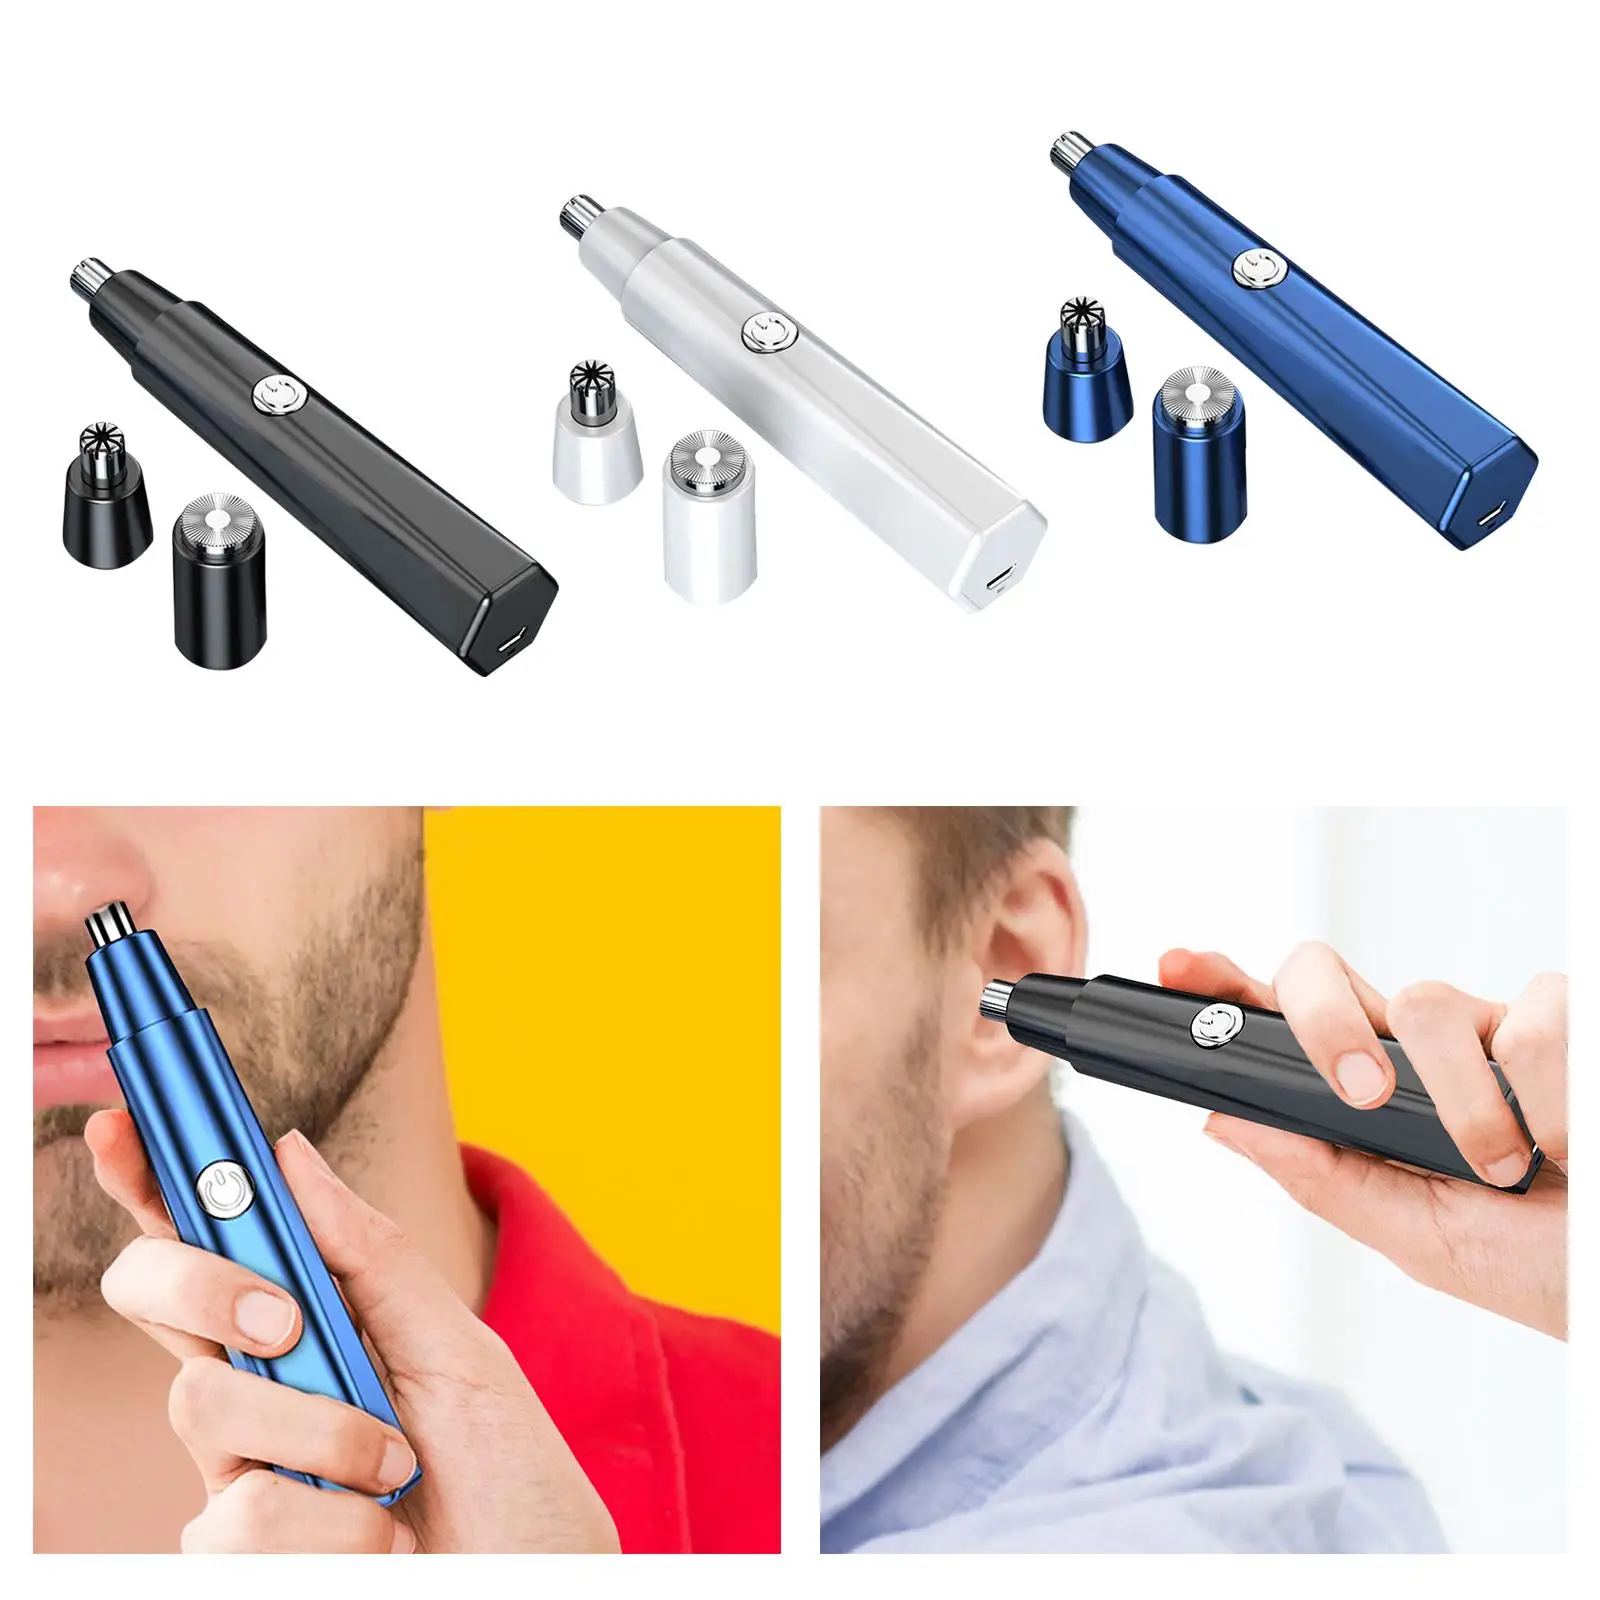 Professional Ear Nose Hair Trimmer USB Rechargeable Waterproof Facial Hair Trimmer Groomer Hair Beard Shaving Removal